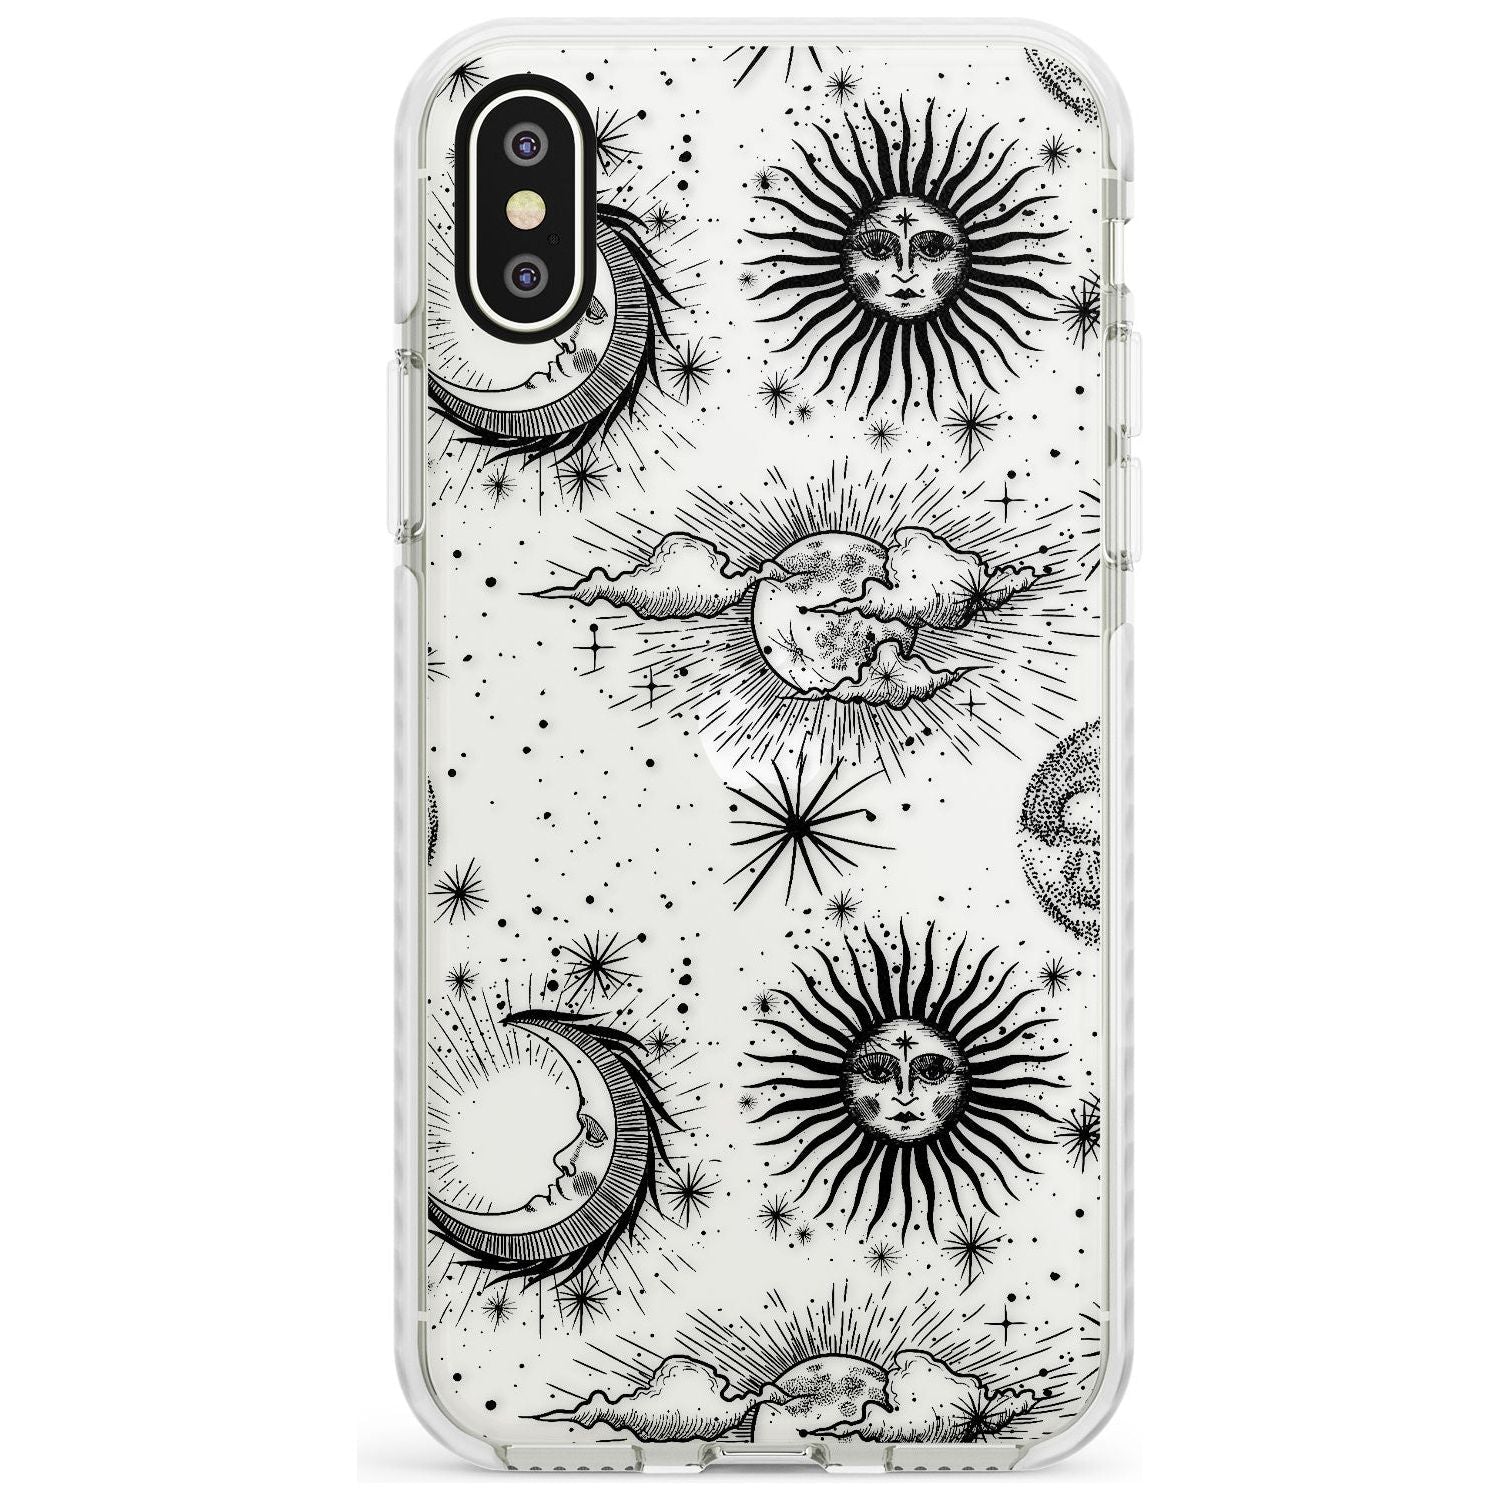 Personalised Abstract Faces Phone Case for iPhone X XS Max XR